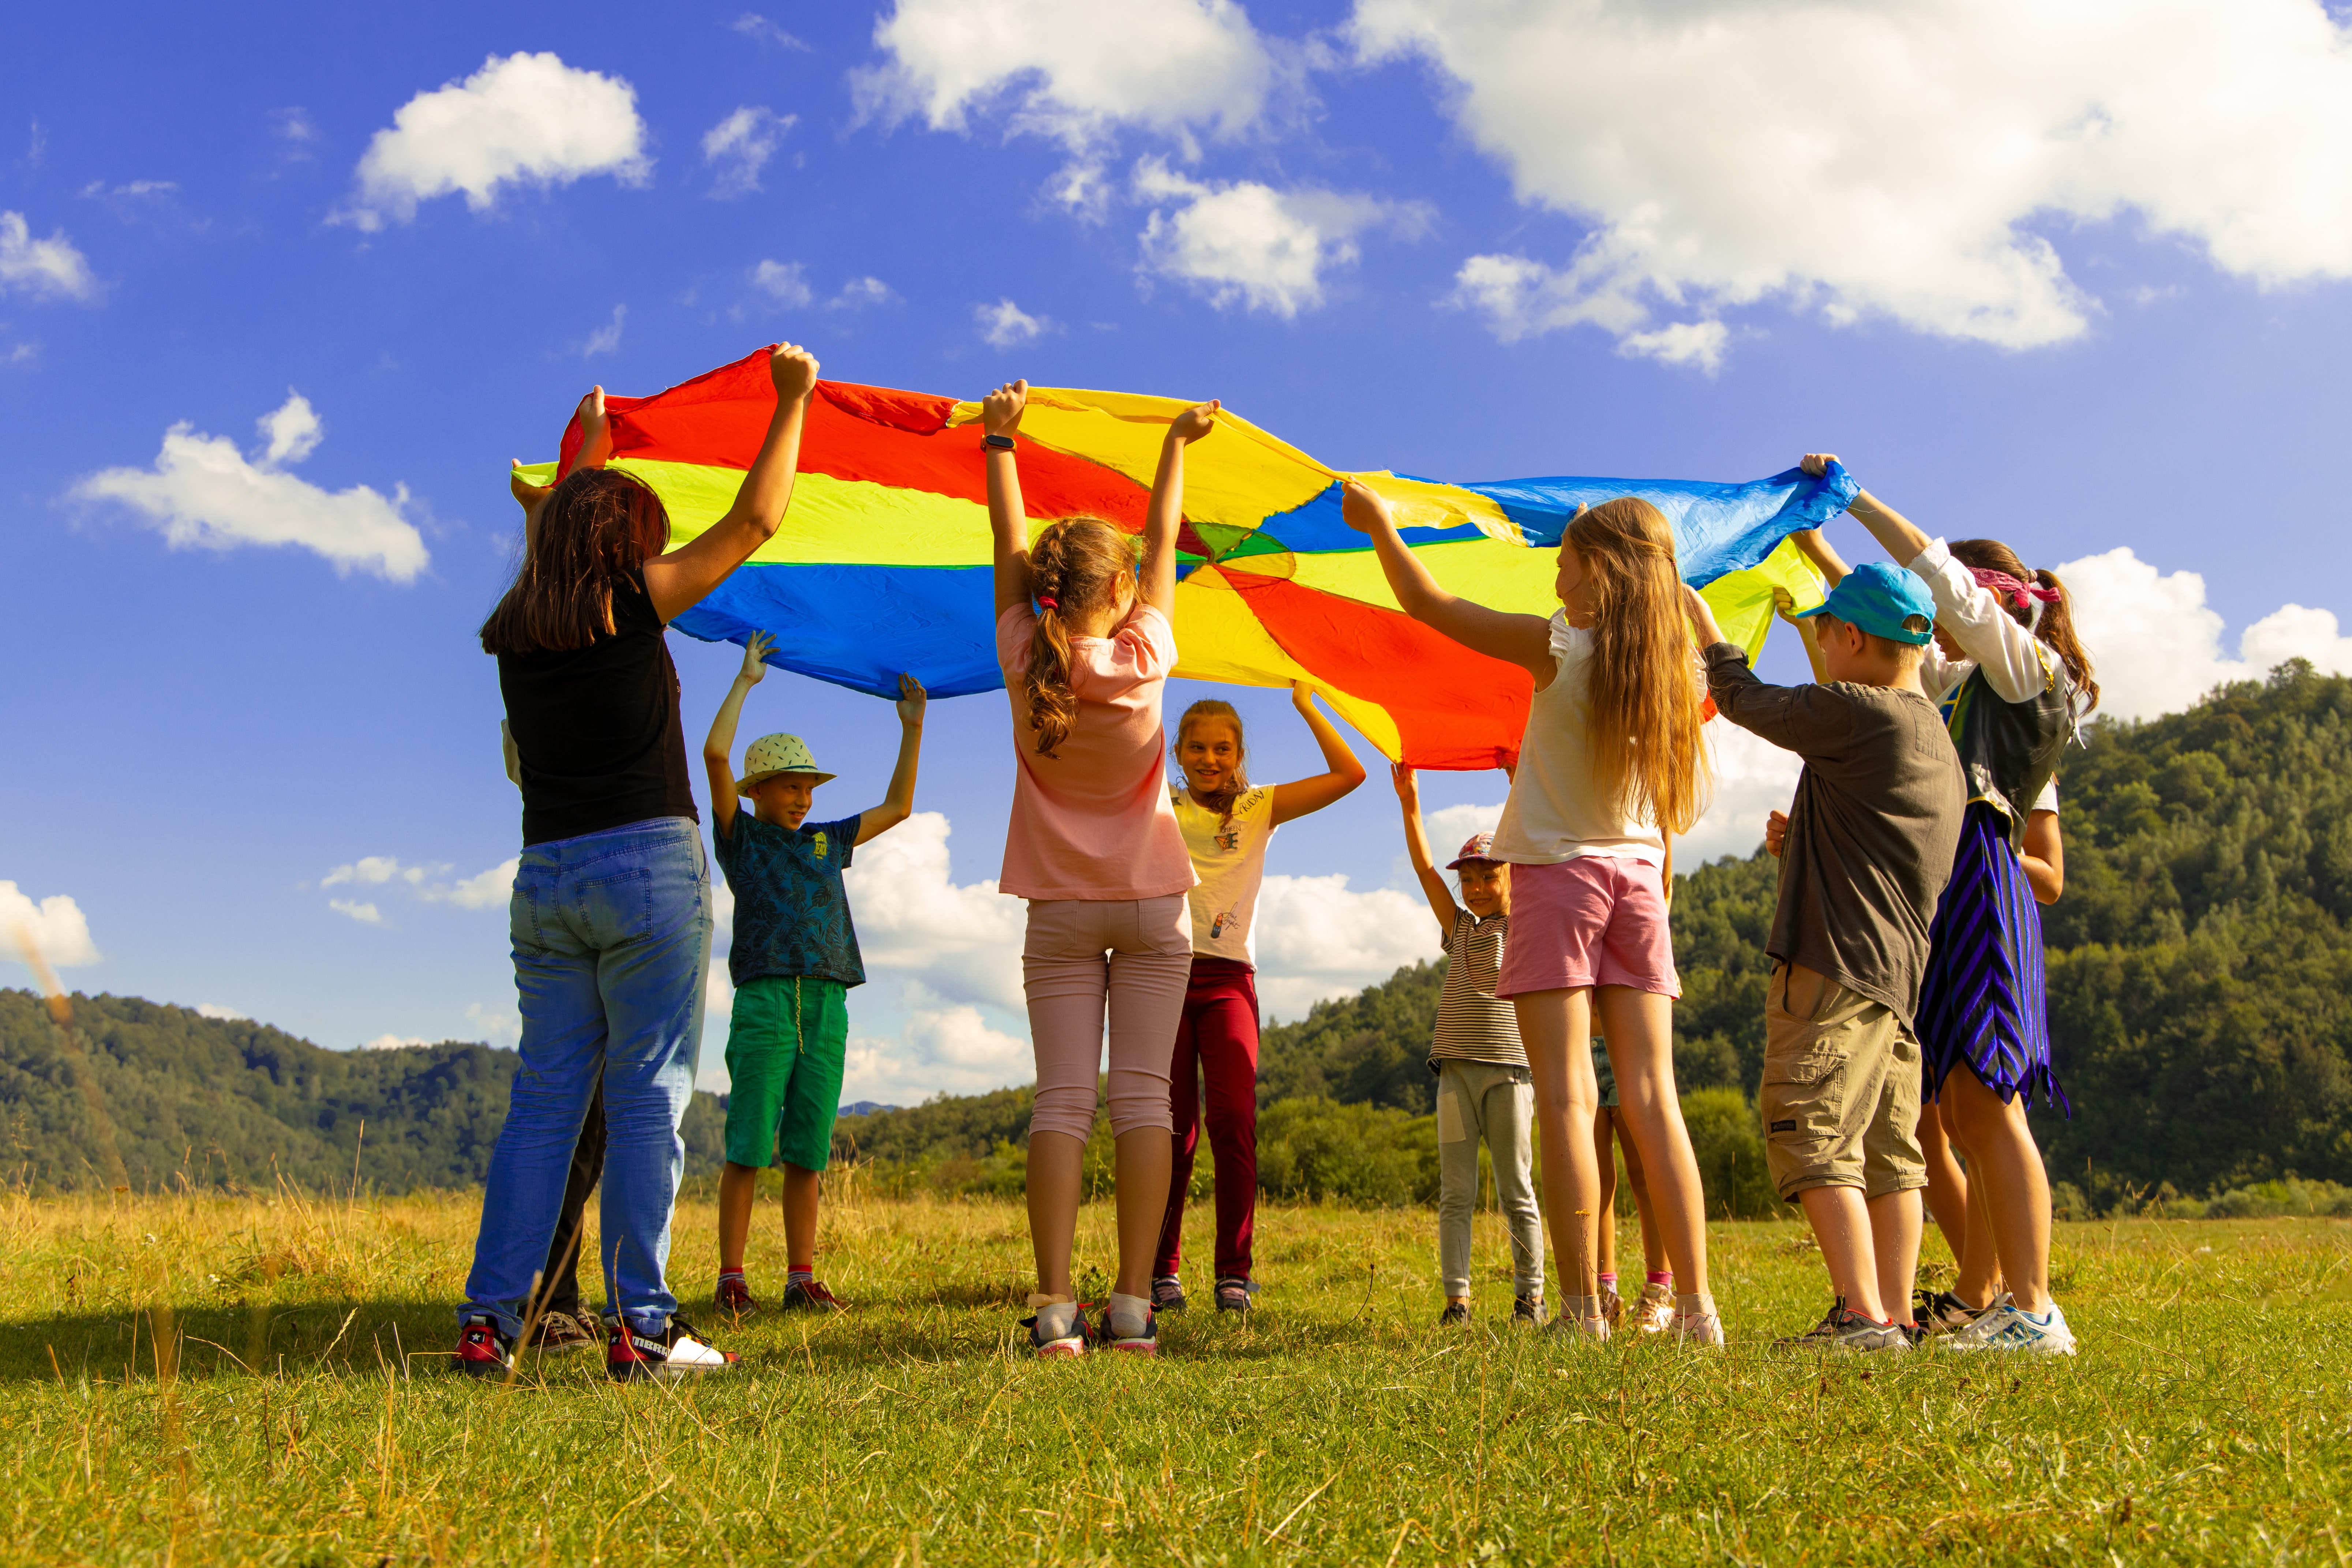 Kids playing with a kite